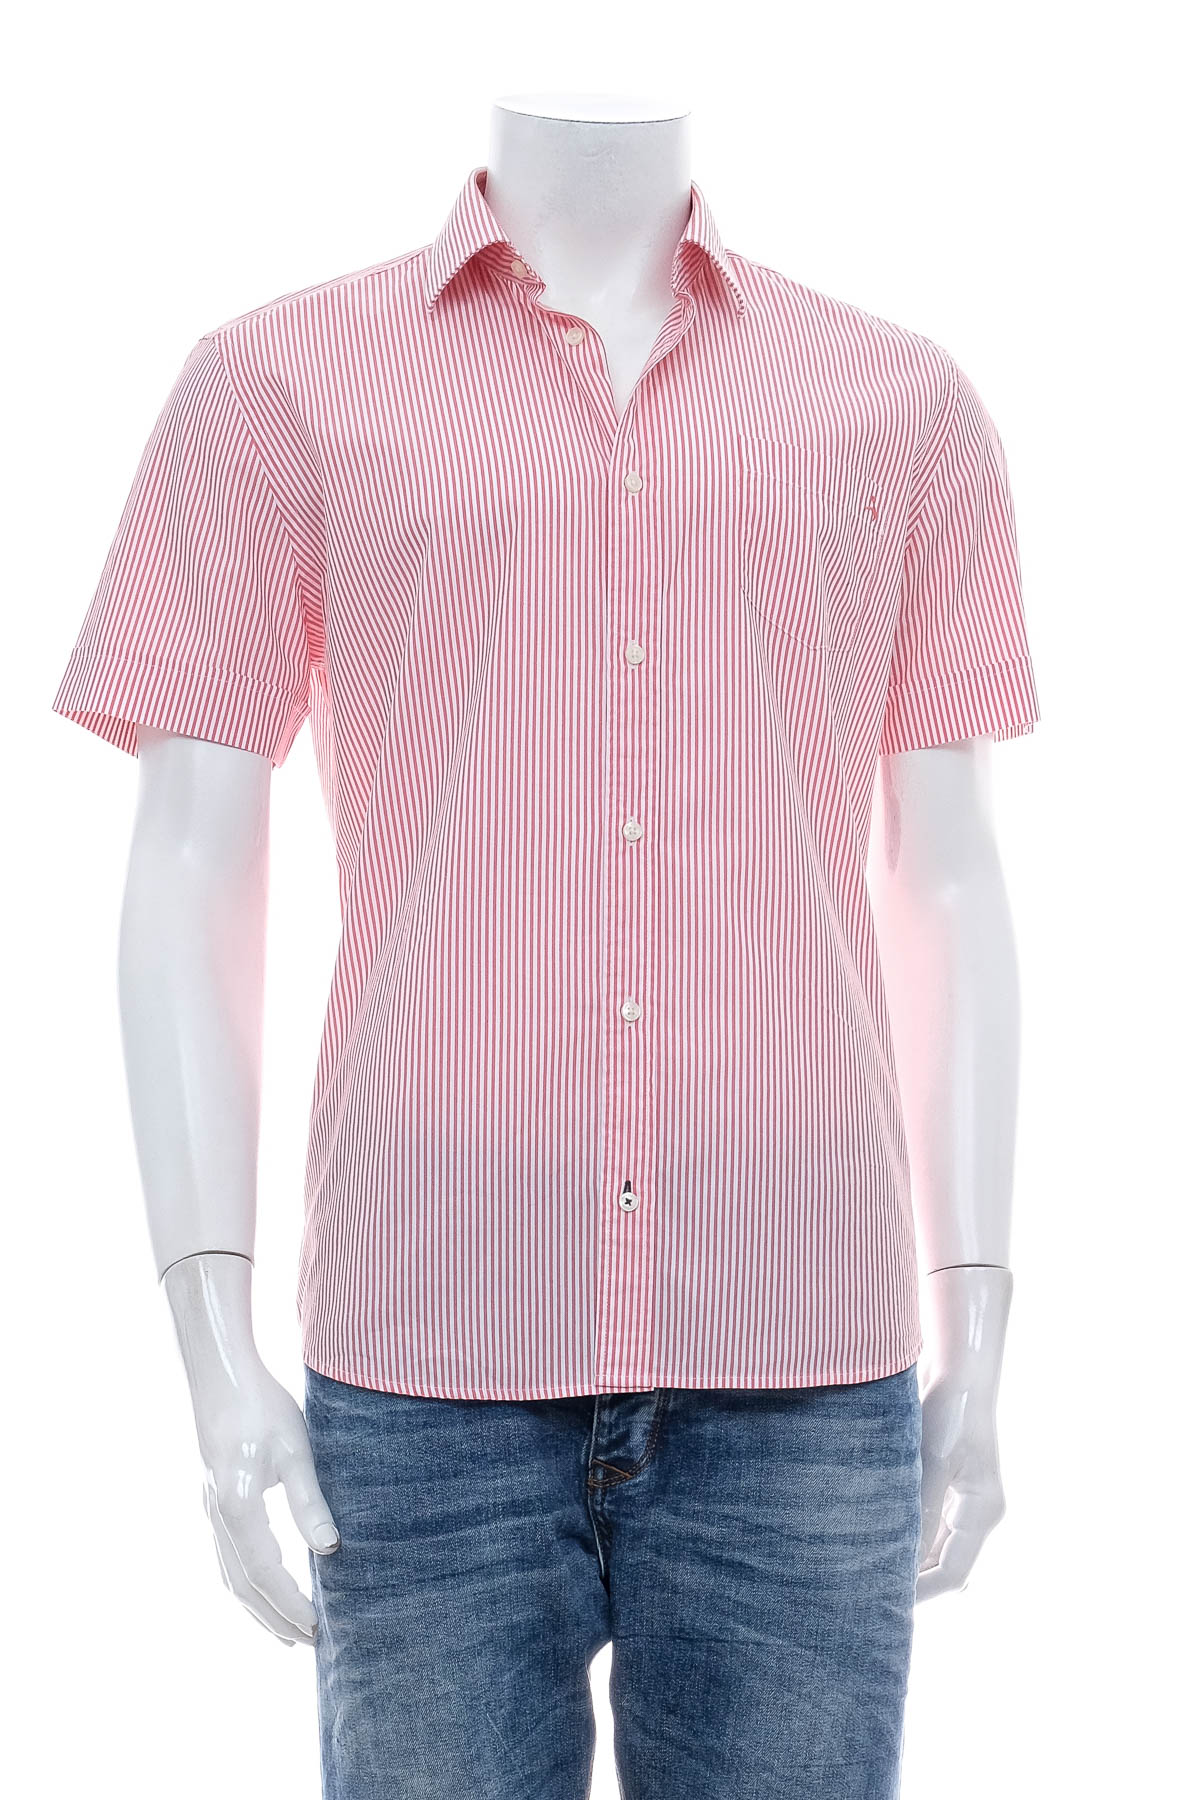 Men's shirt - SELECTION by S.Oliver - 0